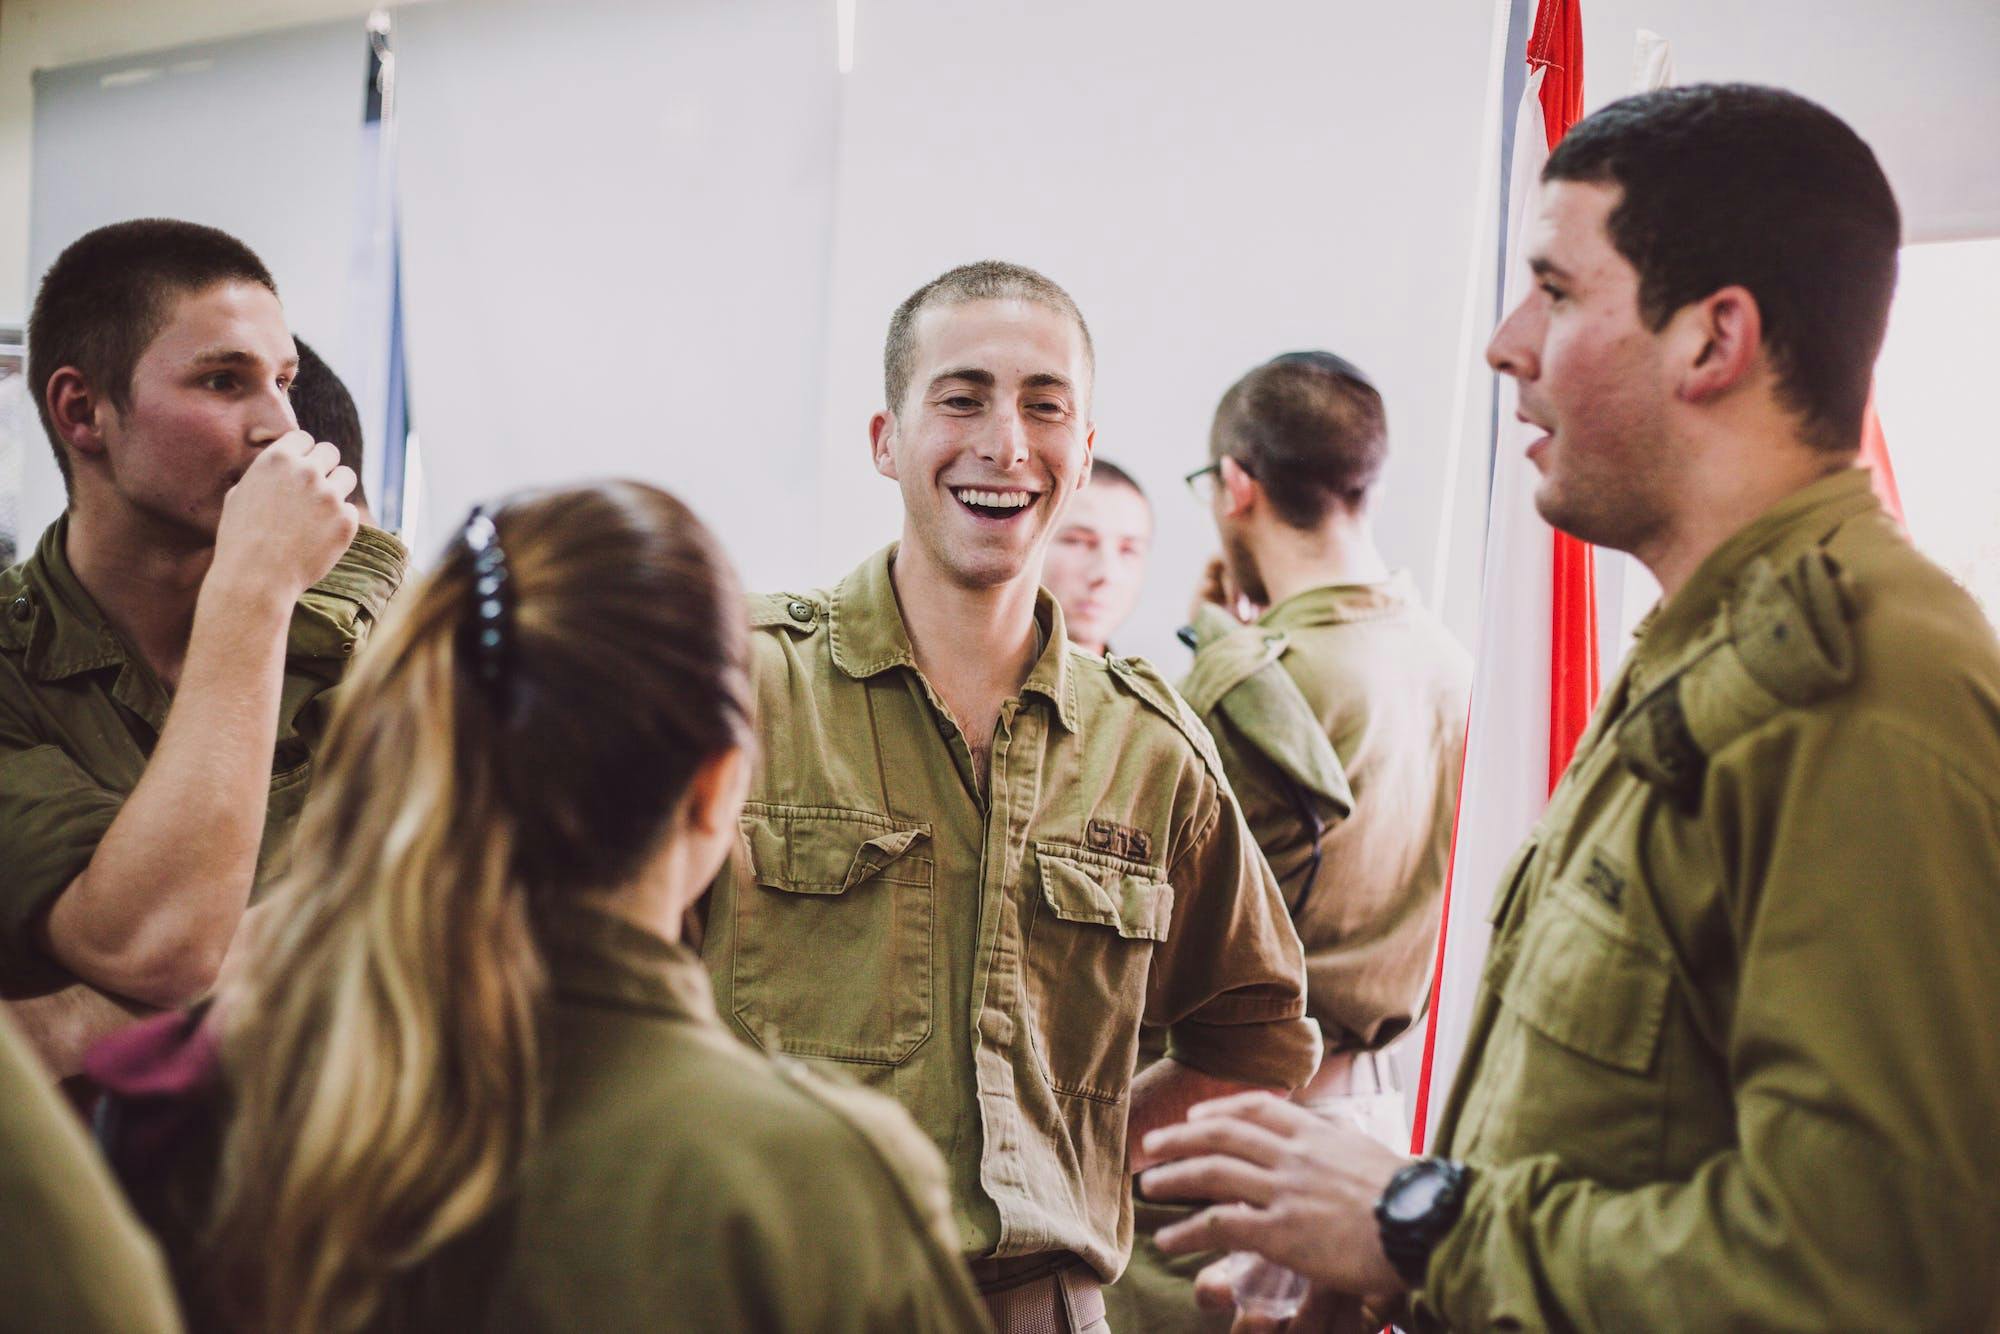 IDF soldiers laughing